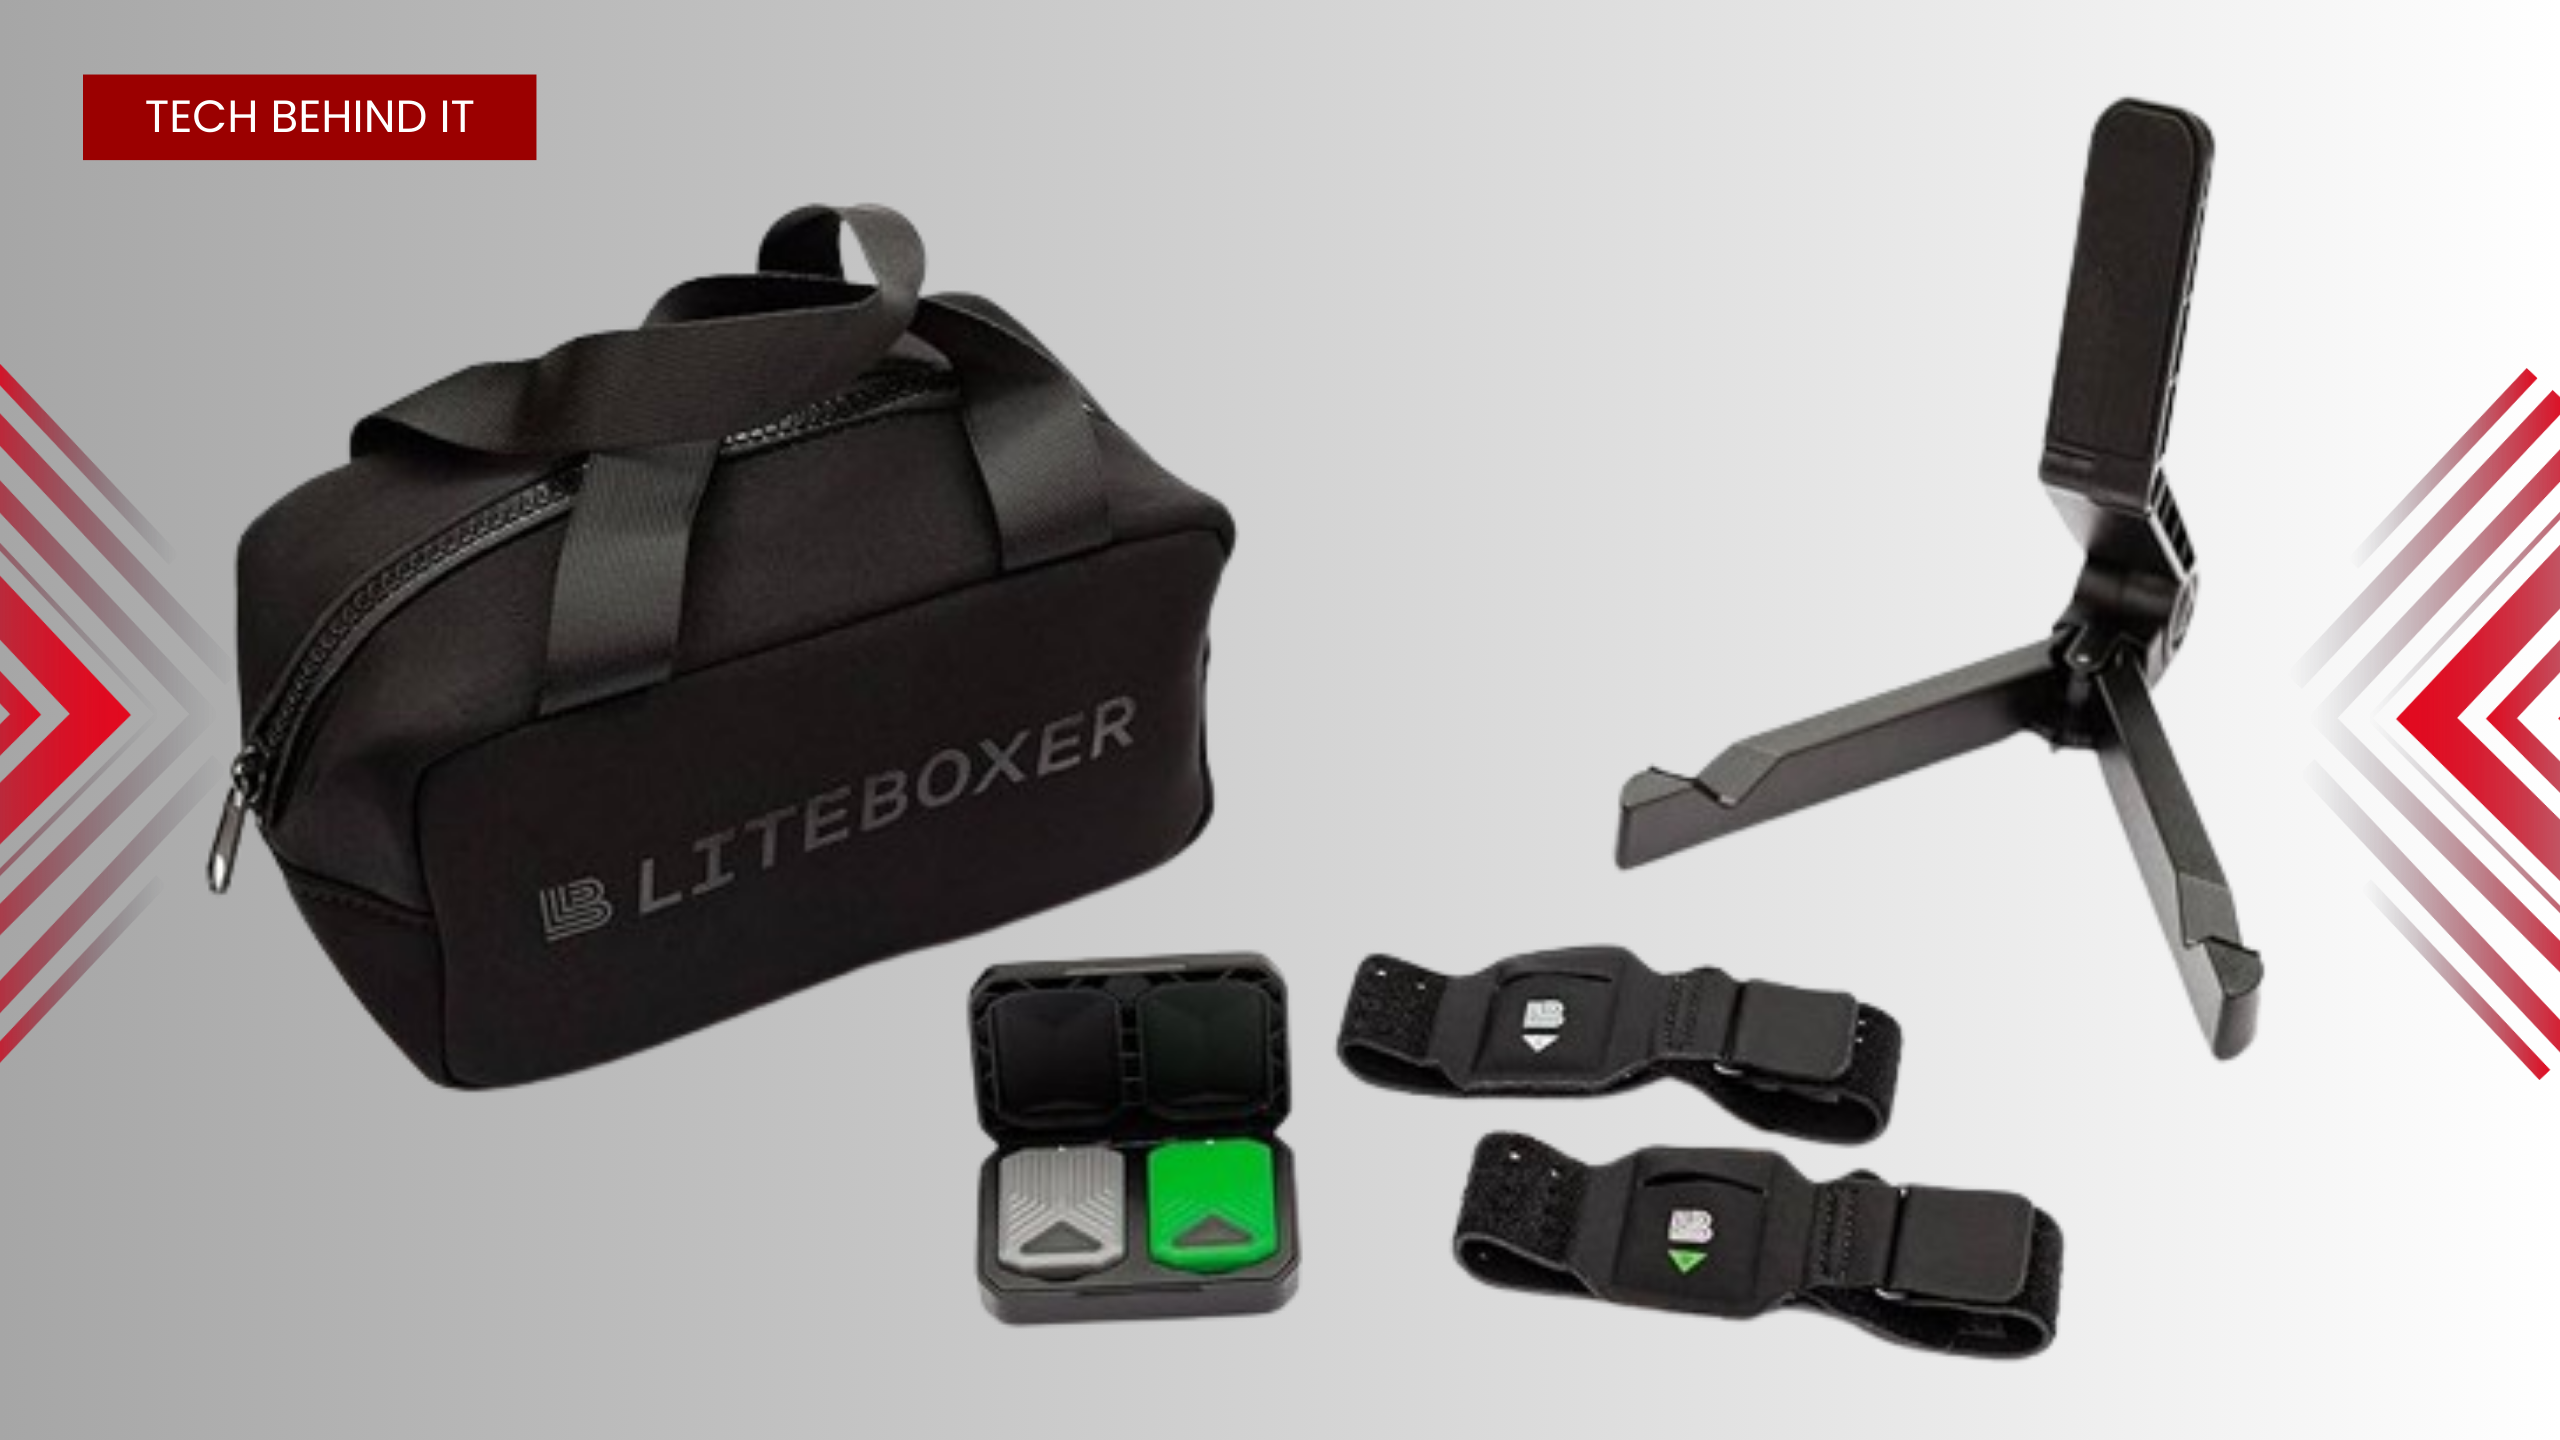 Main Components and Functions of Liteboxer Fitness Bundle